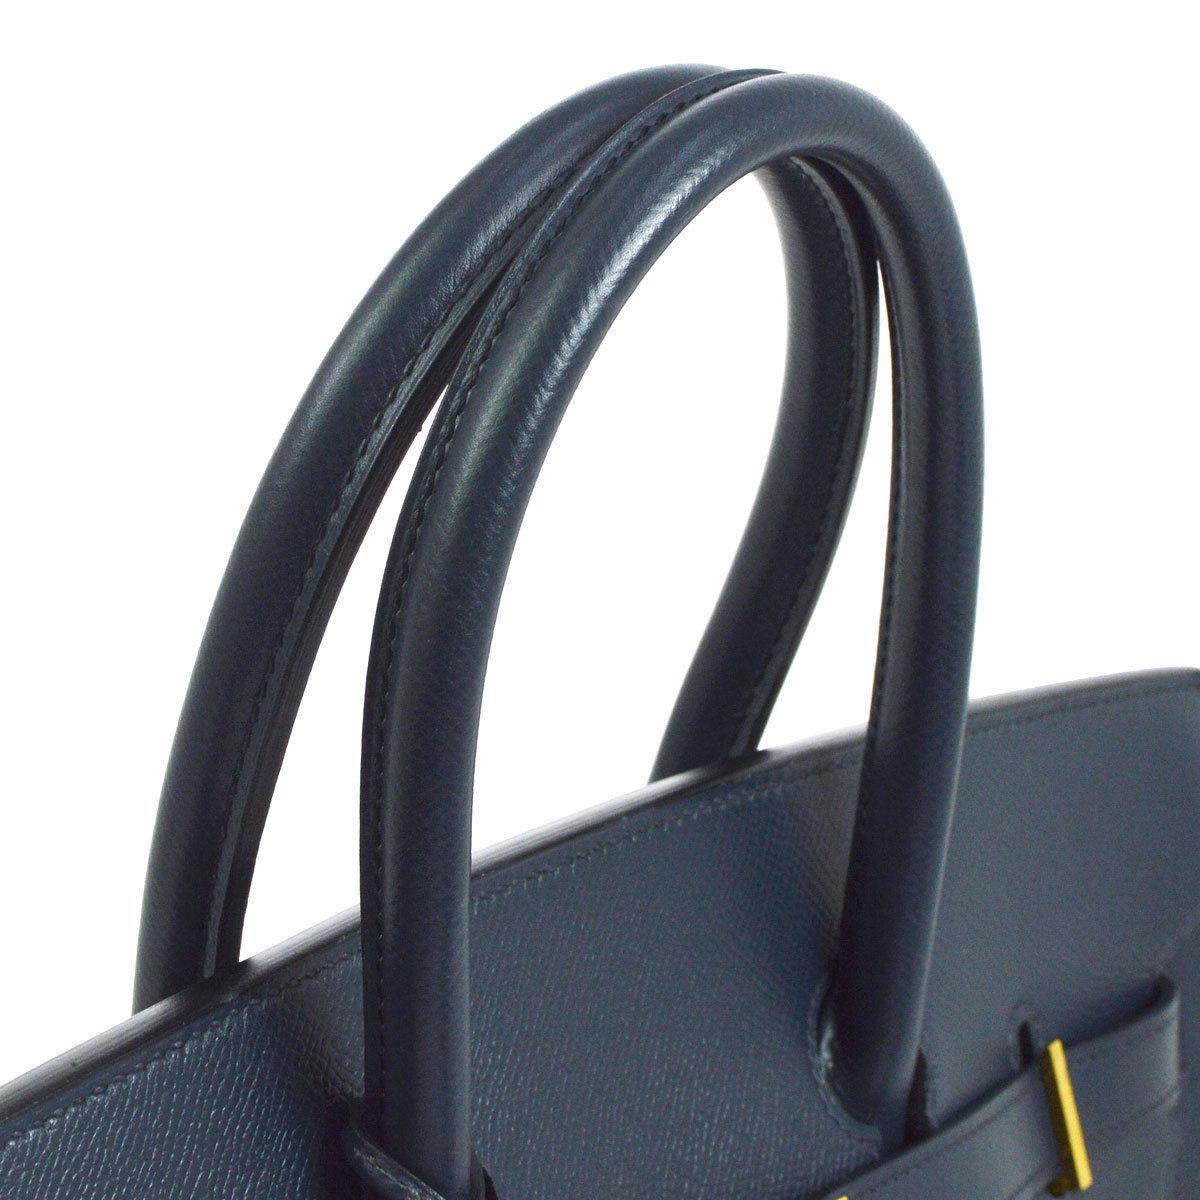 Hermes Birkin 35 Dark Navy Blue Leather Silver Gold Carryall Travel Top Handle Satchel Tote

Leather
Gold tone hardware
Leather lining
Date code present
Made in France
Handle drop 4.25